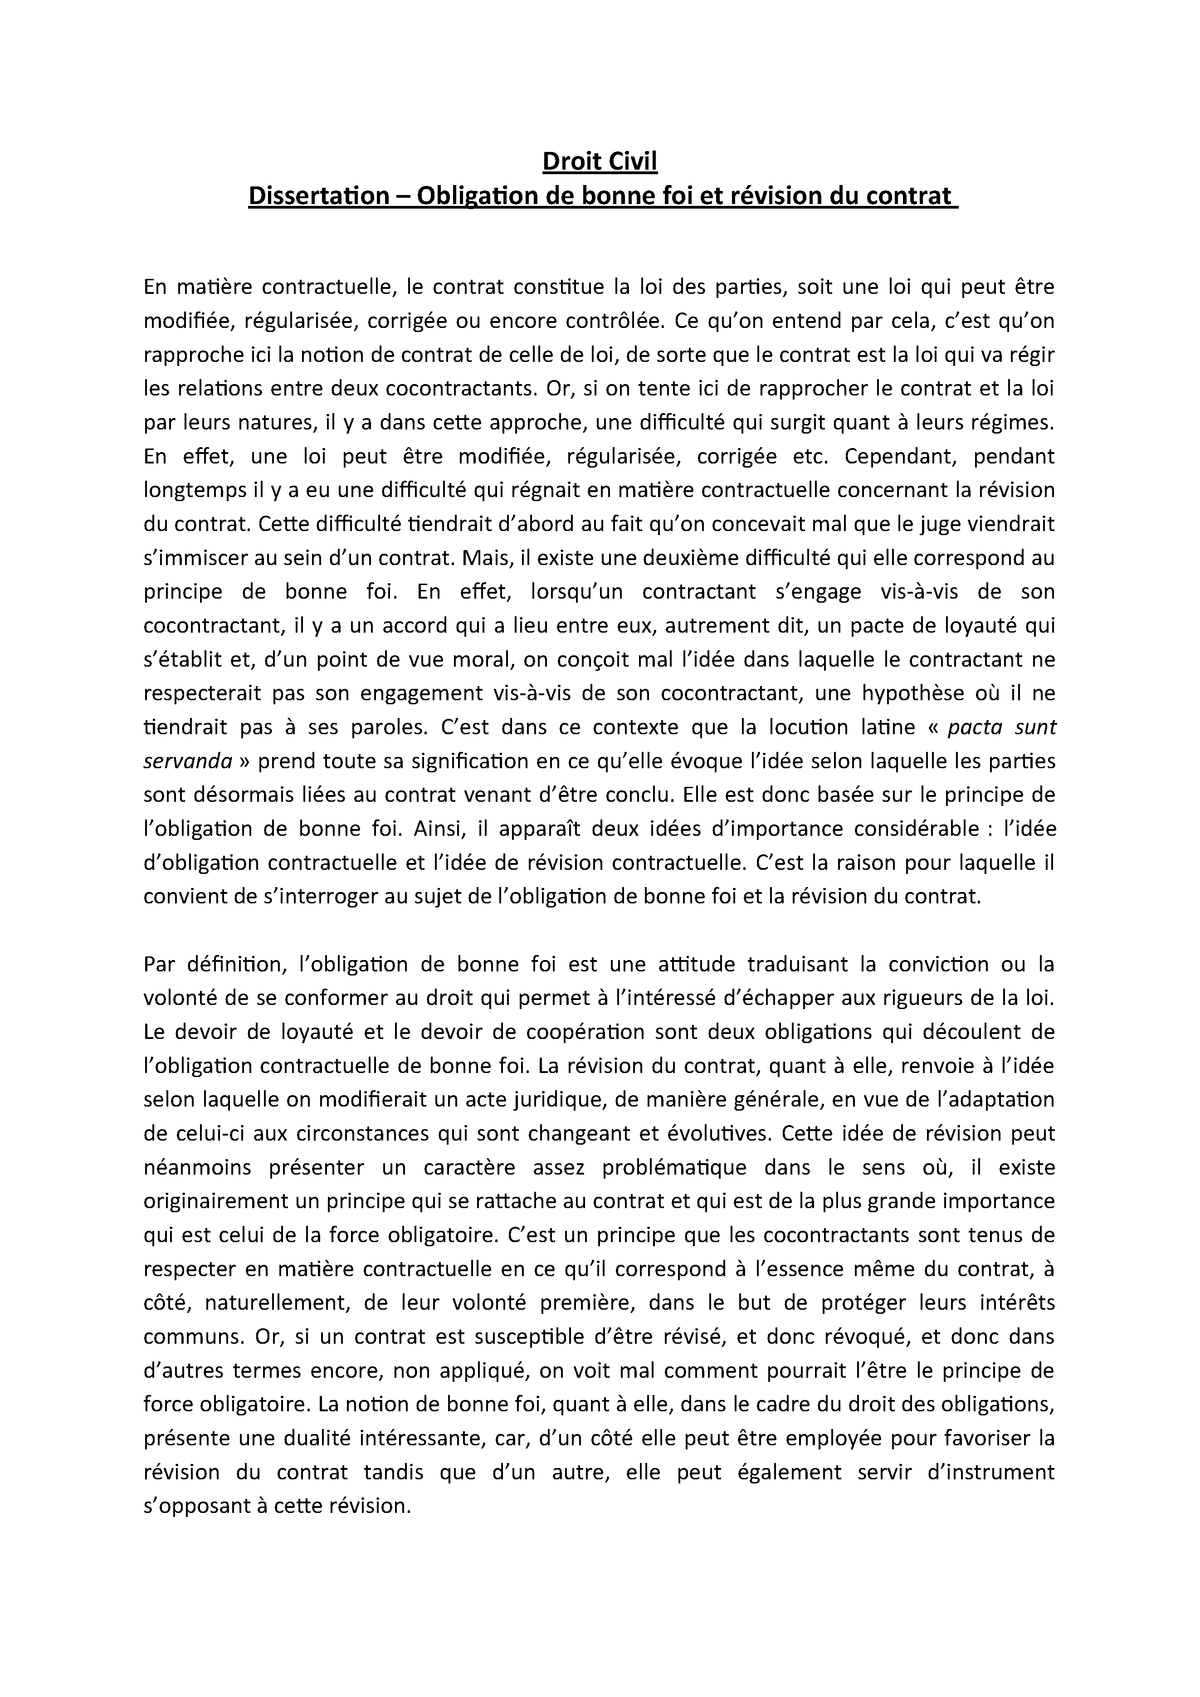 Essay about personal experience